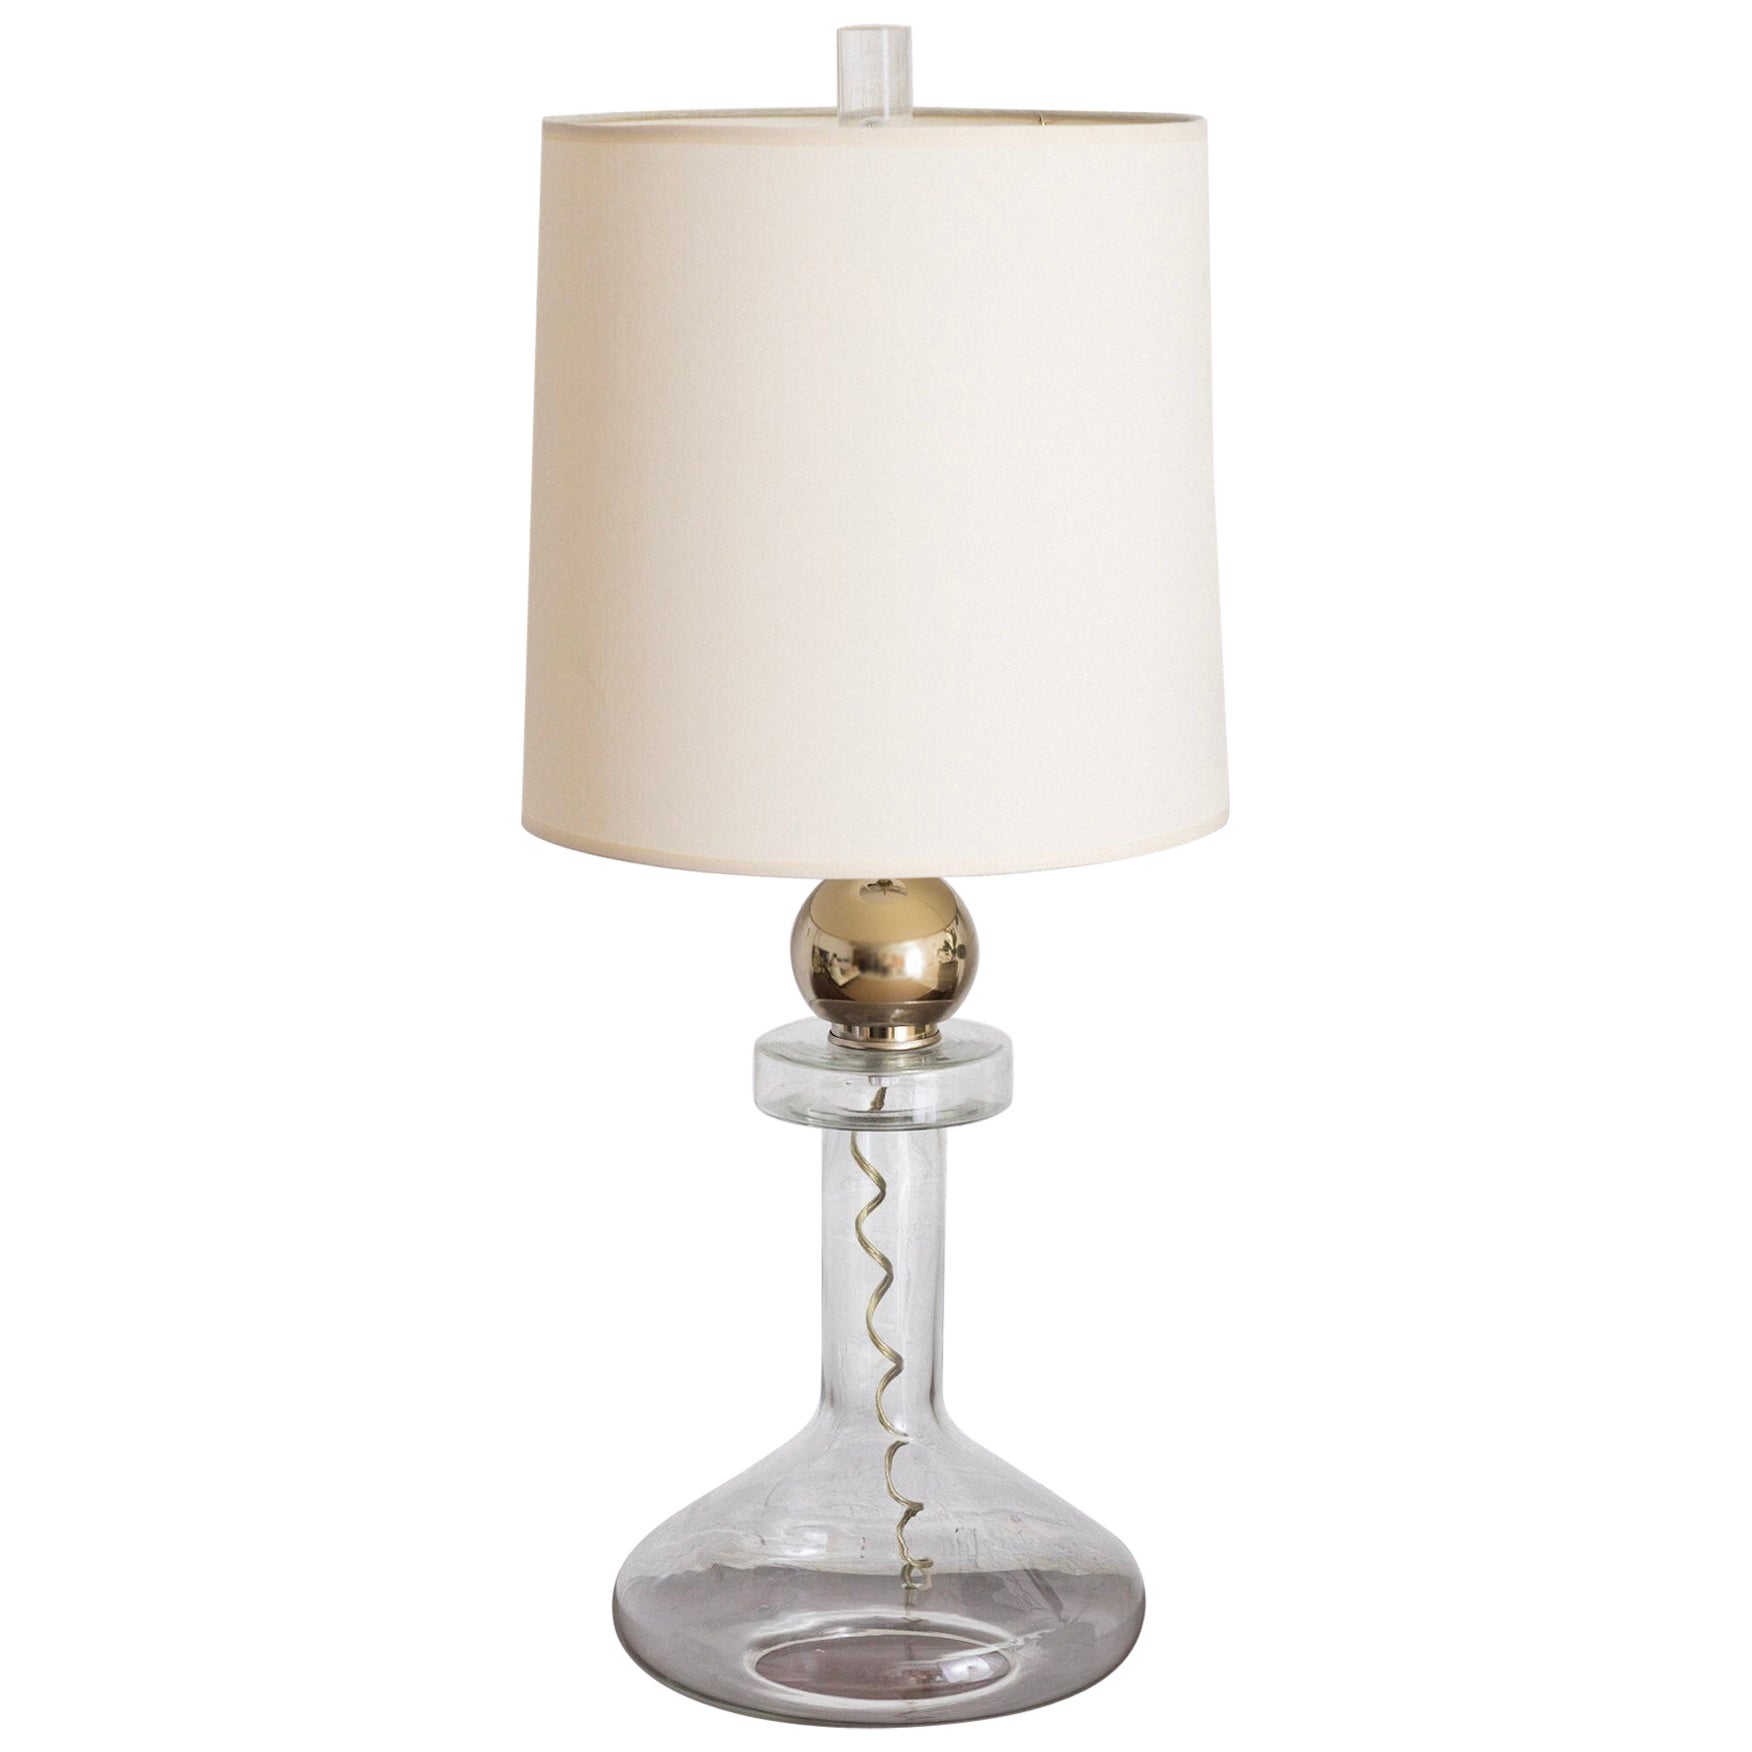 Flask Form Glass Lamp with Cord Detail For Sale